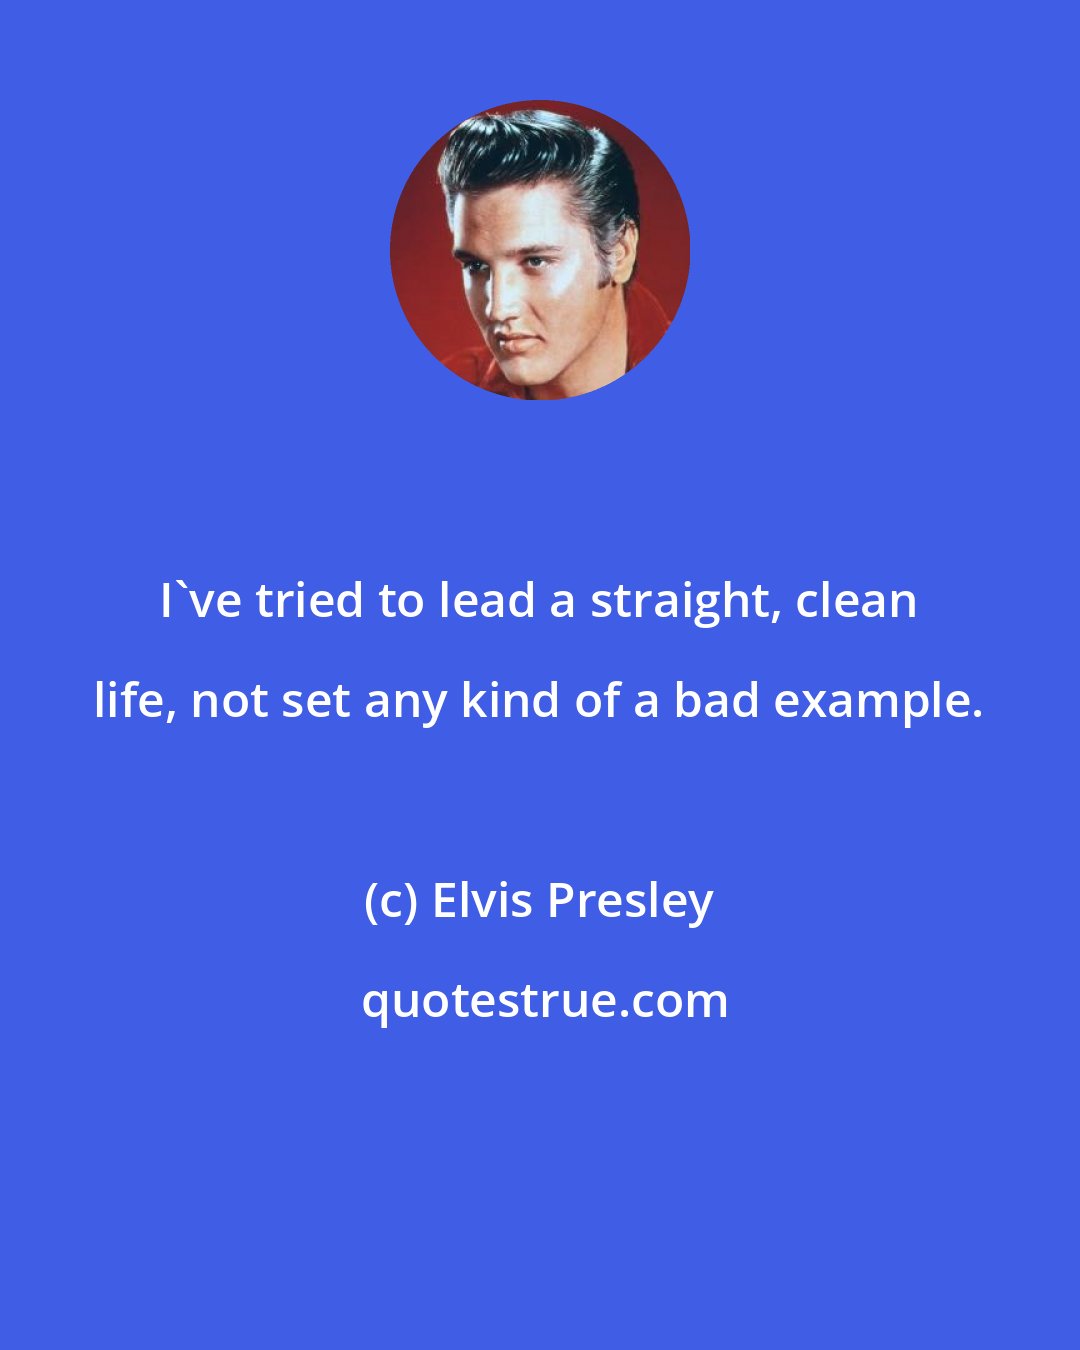 Elvis Presley: I've tried to lead a straight, clean life, not set any kind of a bad example.